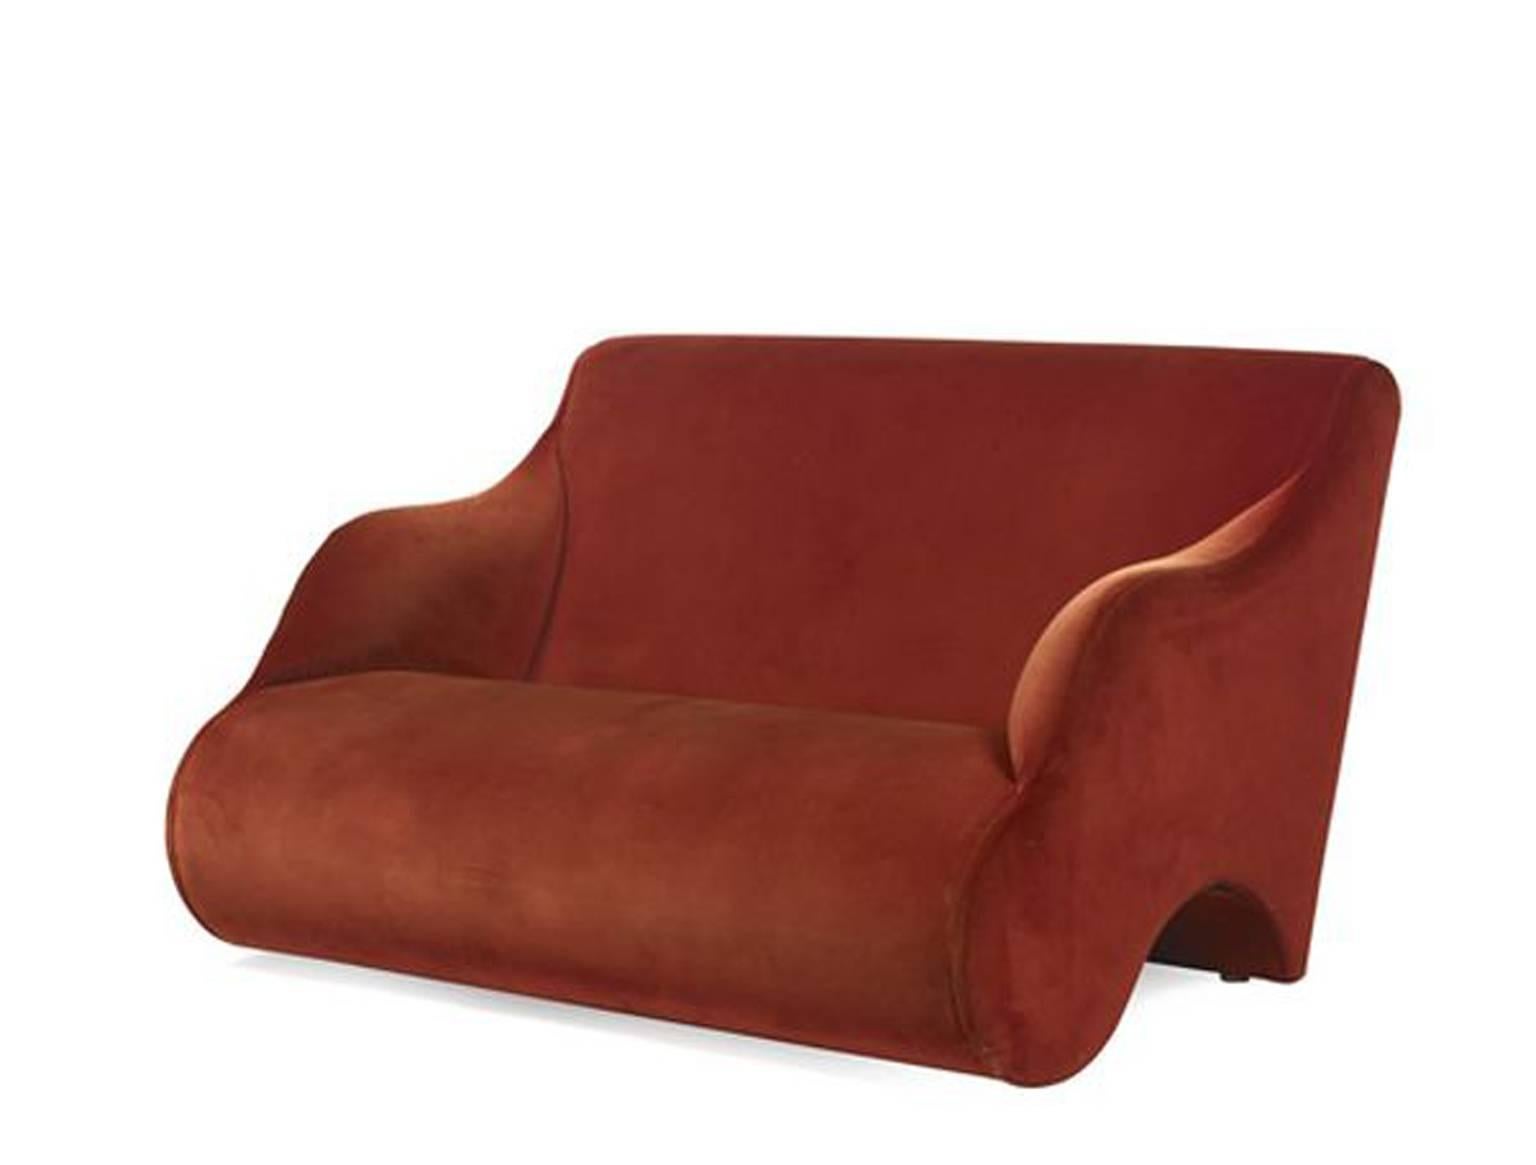 Marie-France sofa,
red wool velvet.
Measures: L 145cm, P 91 cm, H 81cm.
Neotu edition. 1989.
Vintage piece.

Pricing does not include sales tax (French VAT) if applicable.